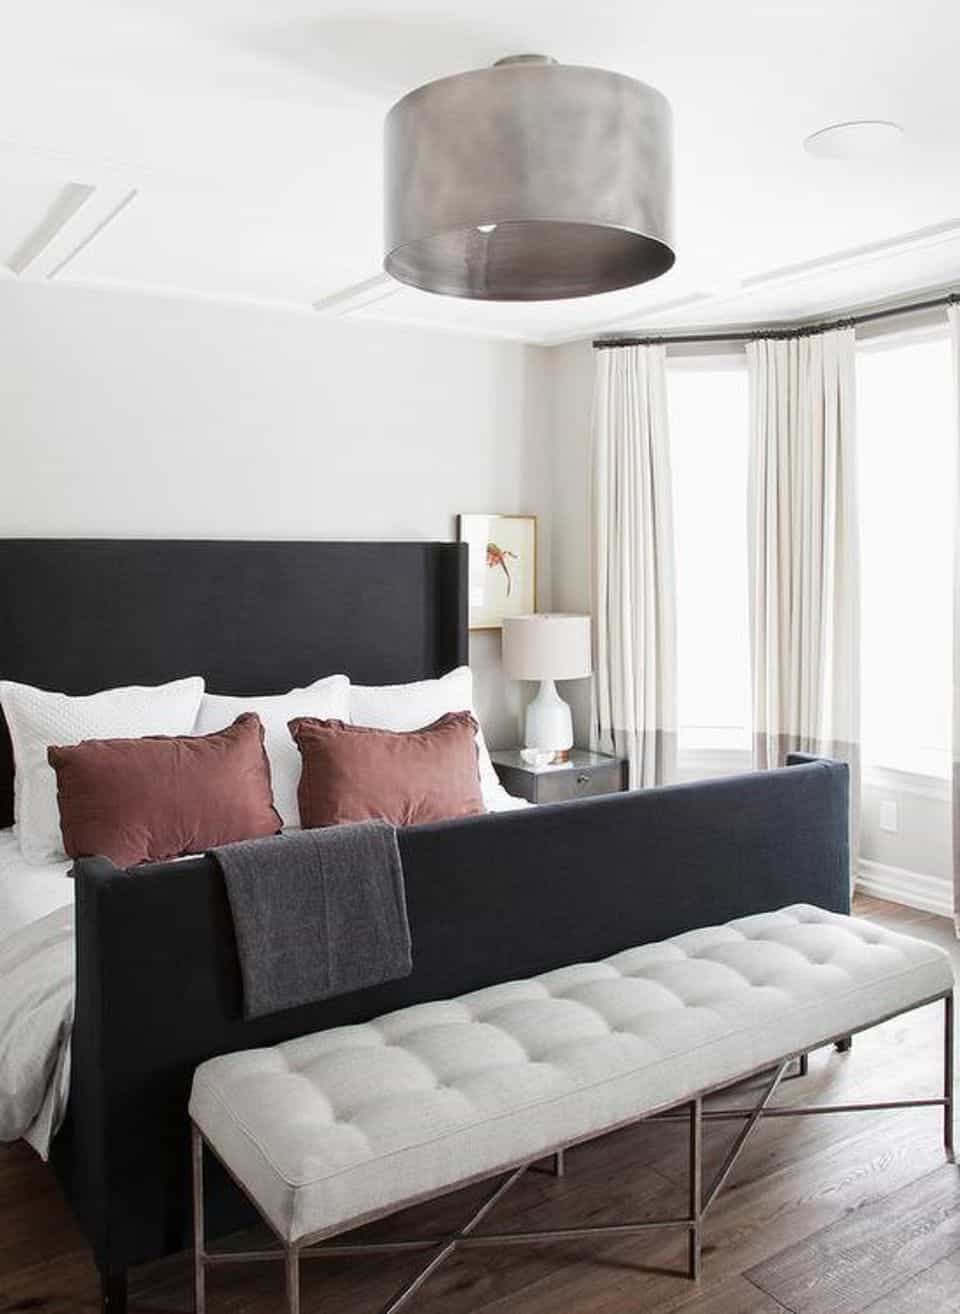 Multiple different light fixtures in one bedroom give the room a romantic twist while providing ample amounts of lighting.